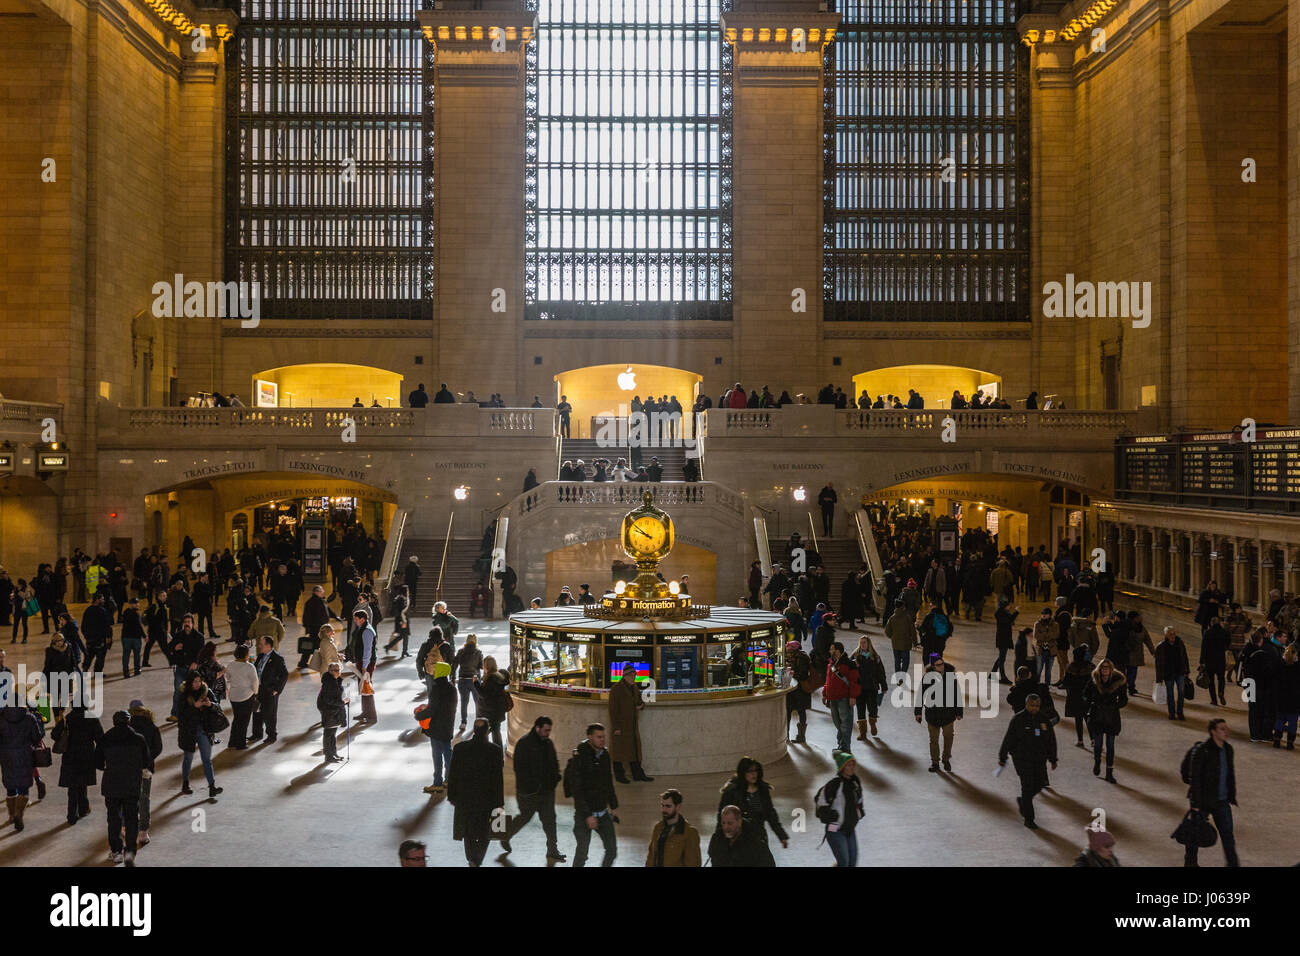 Crowds in the main concourse, Grand Central Station, New York Stock Photo